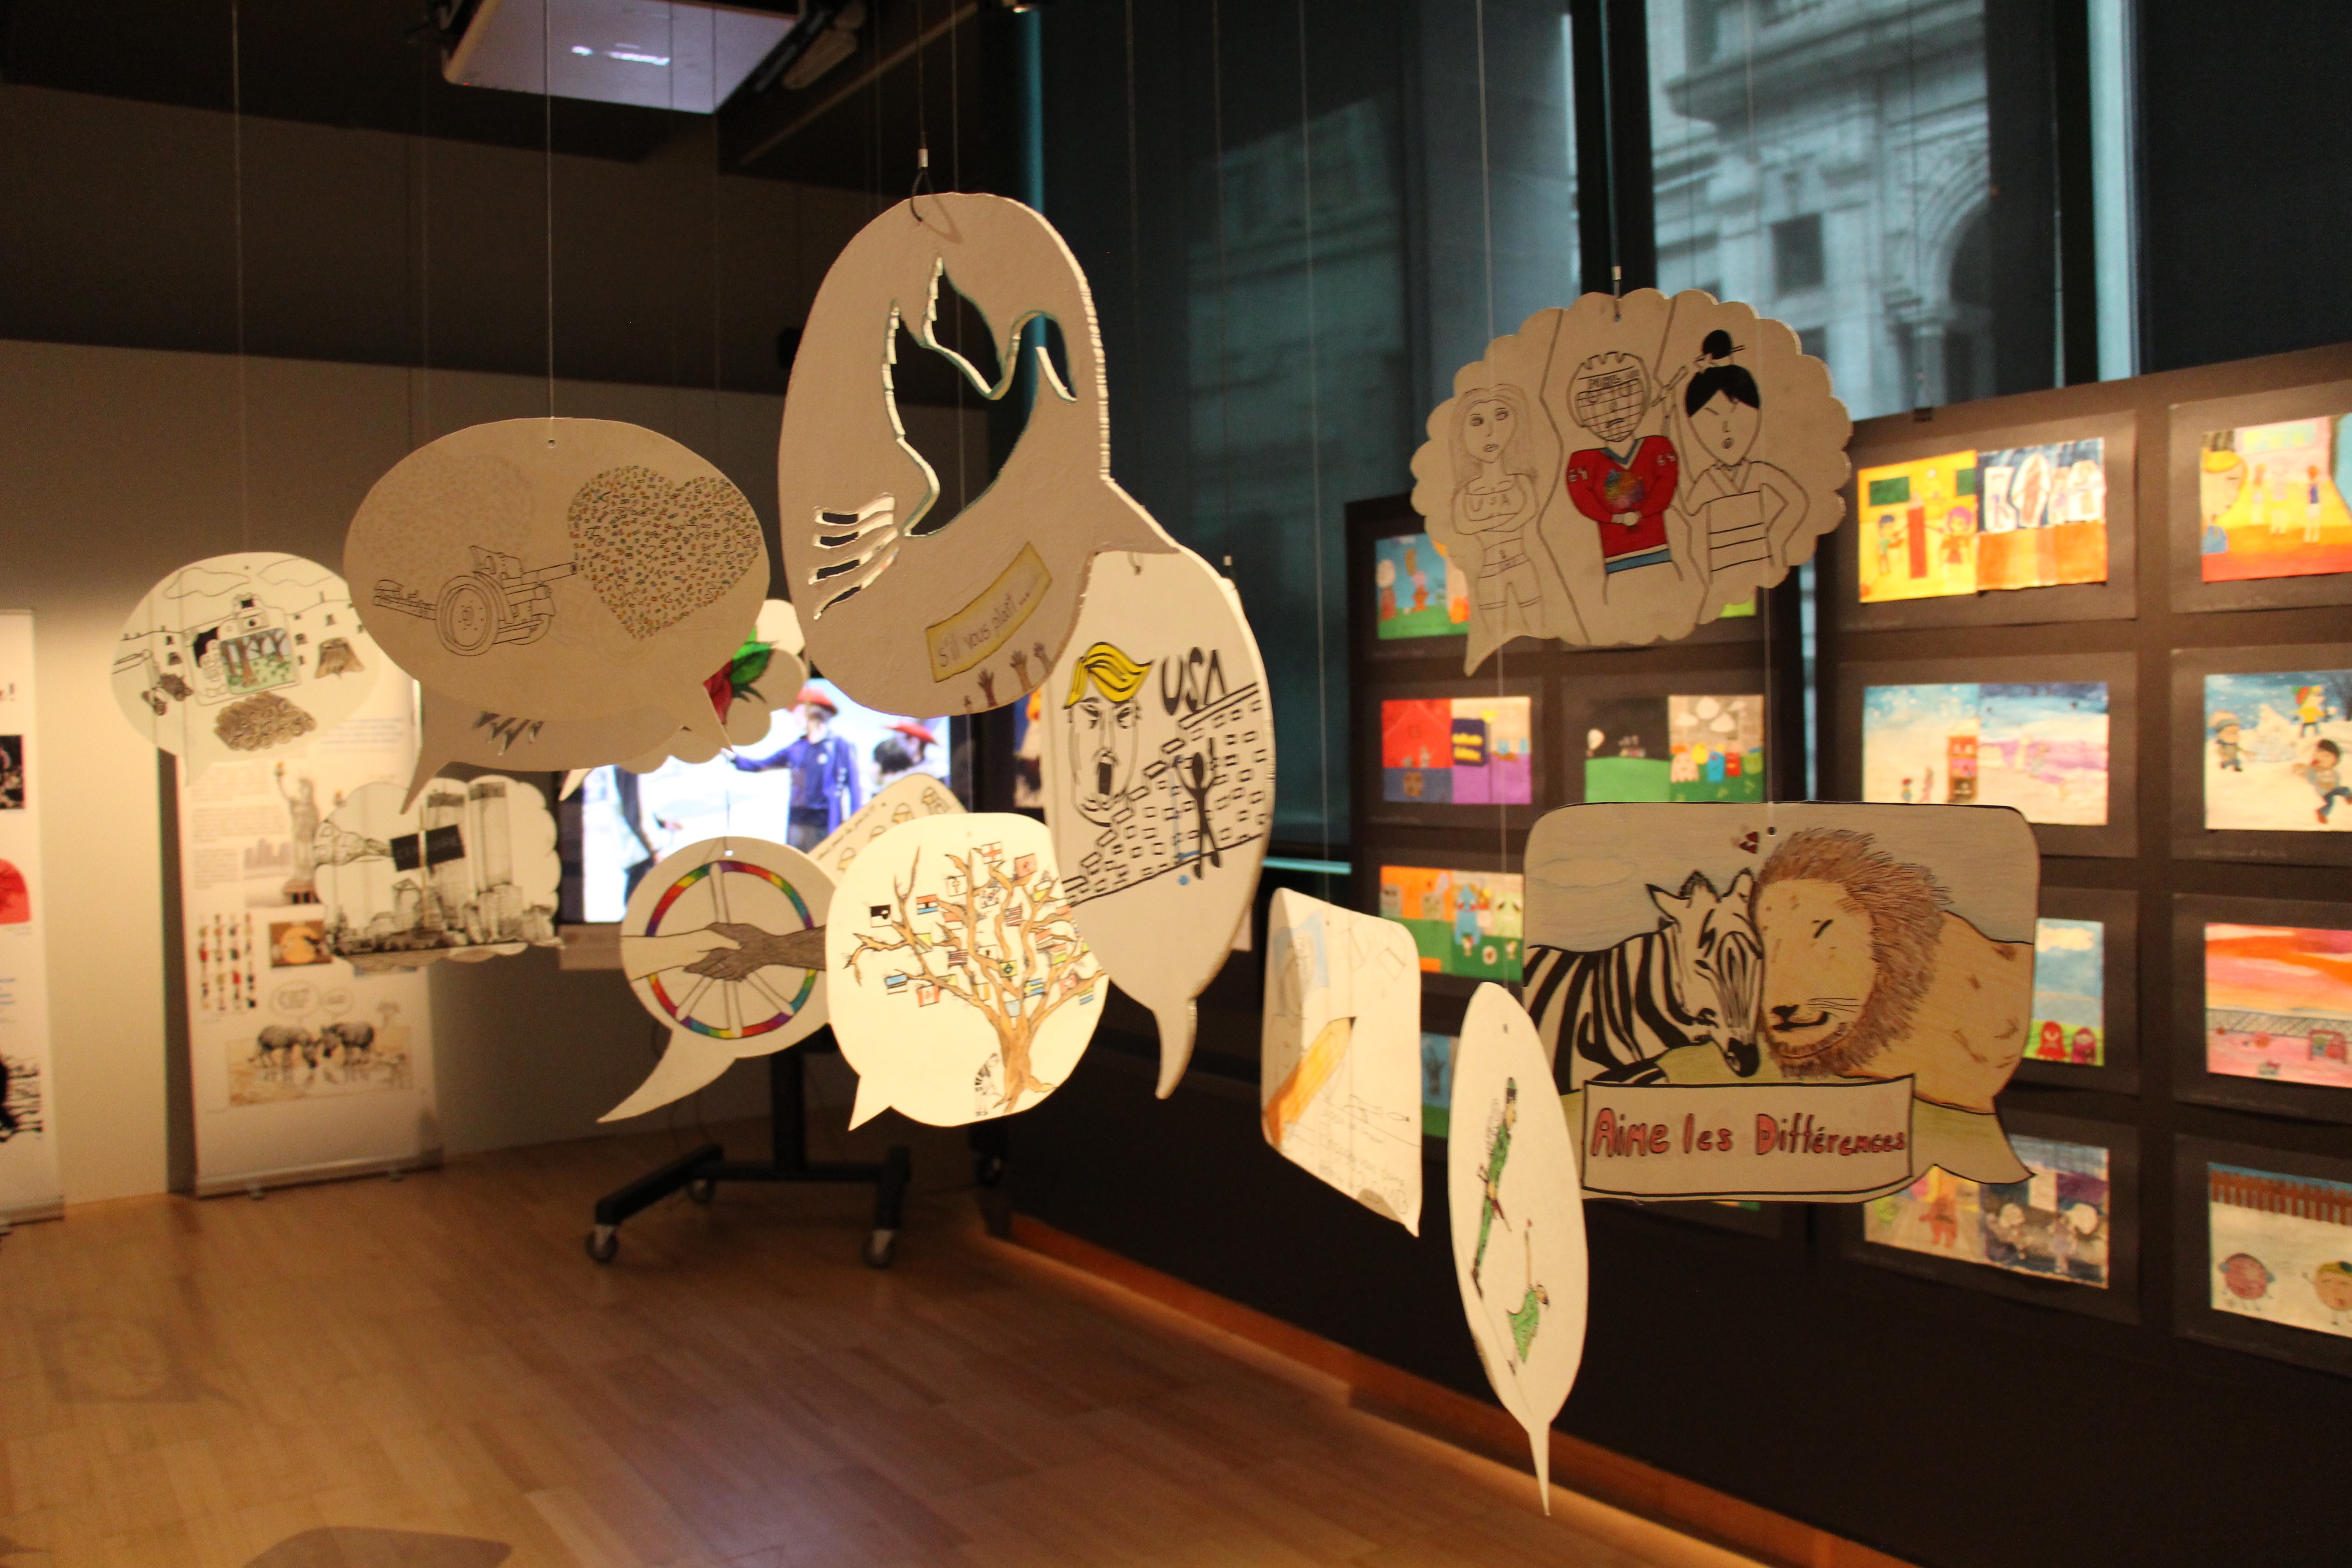 View of the student exhibition